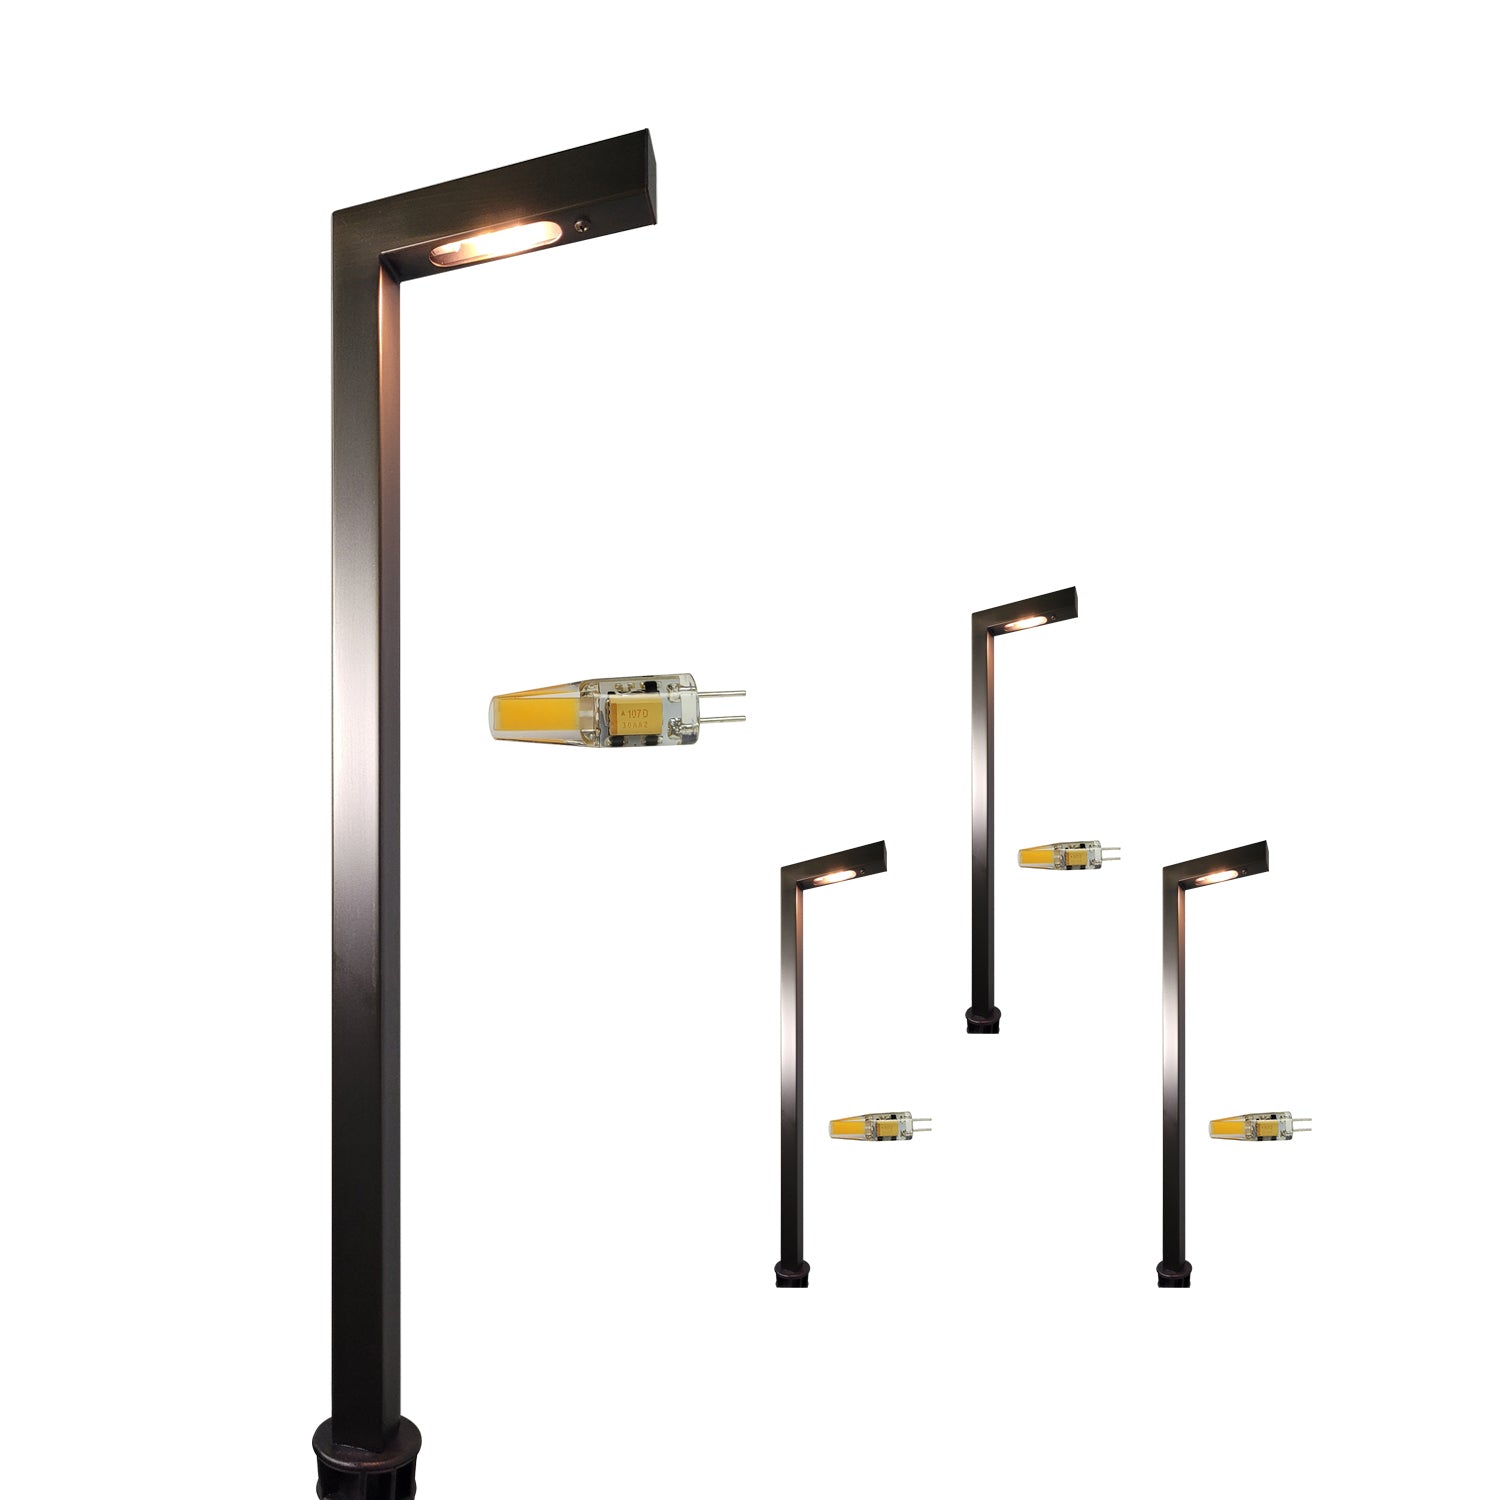 Solid brass low voltage outdoor pathway light set with adjustable angles and showcased LED bulbs, ideal for waterproof landscape lighting